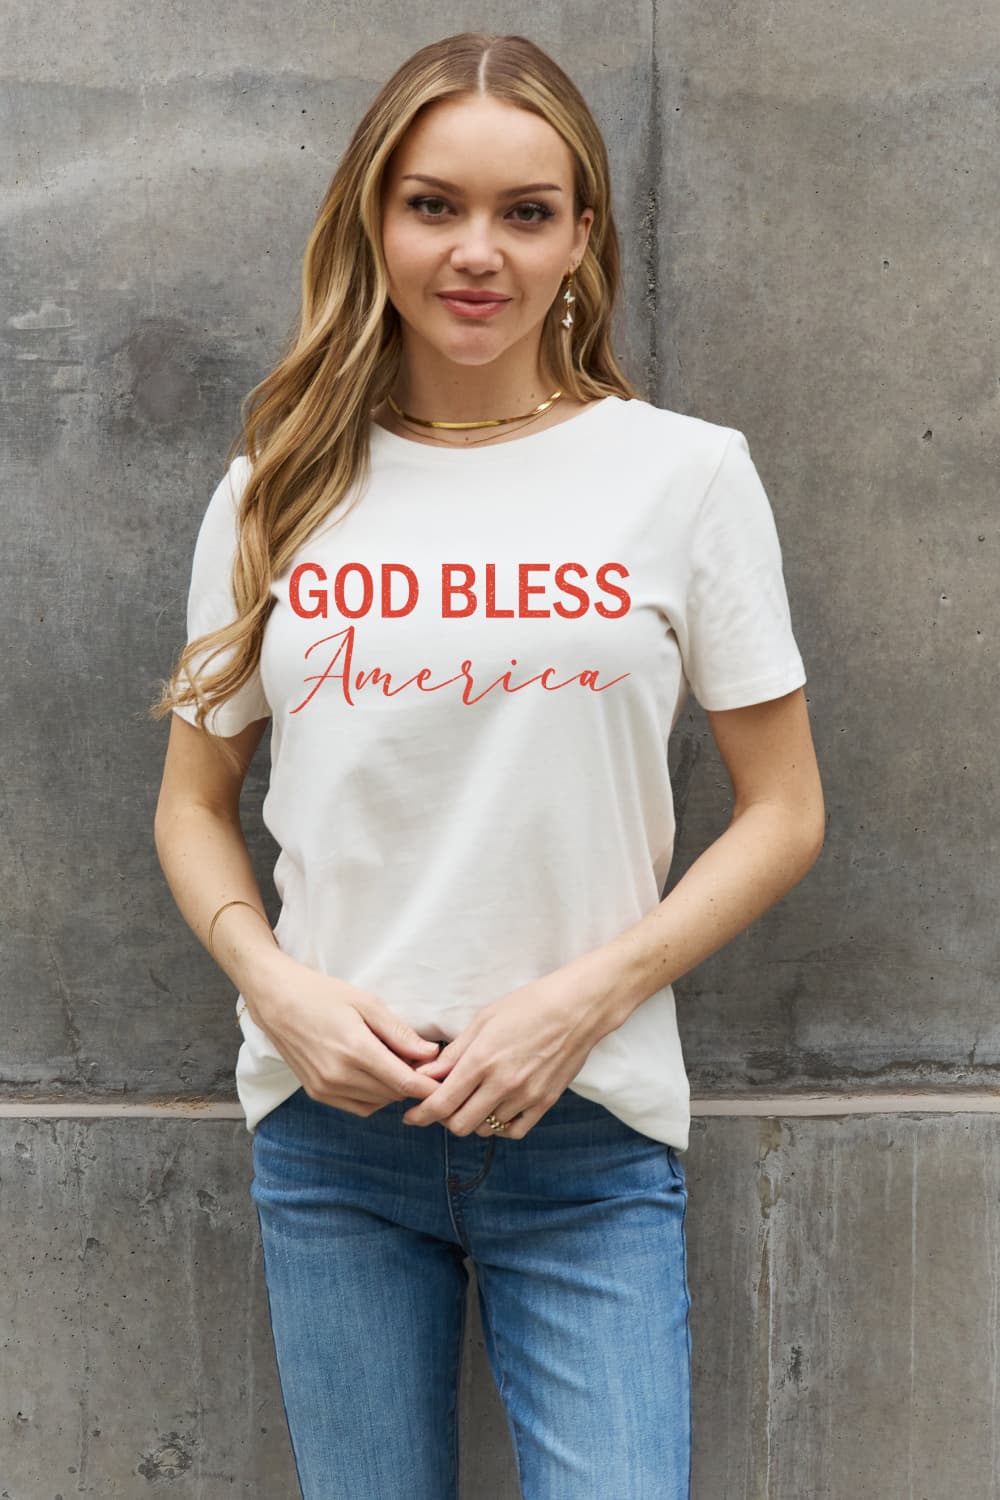 Simply Love GOD BLESS AMERICA Graphic Cotton Tee BLUE ZONE PLANET